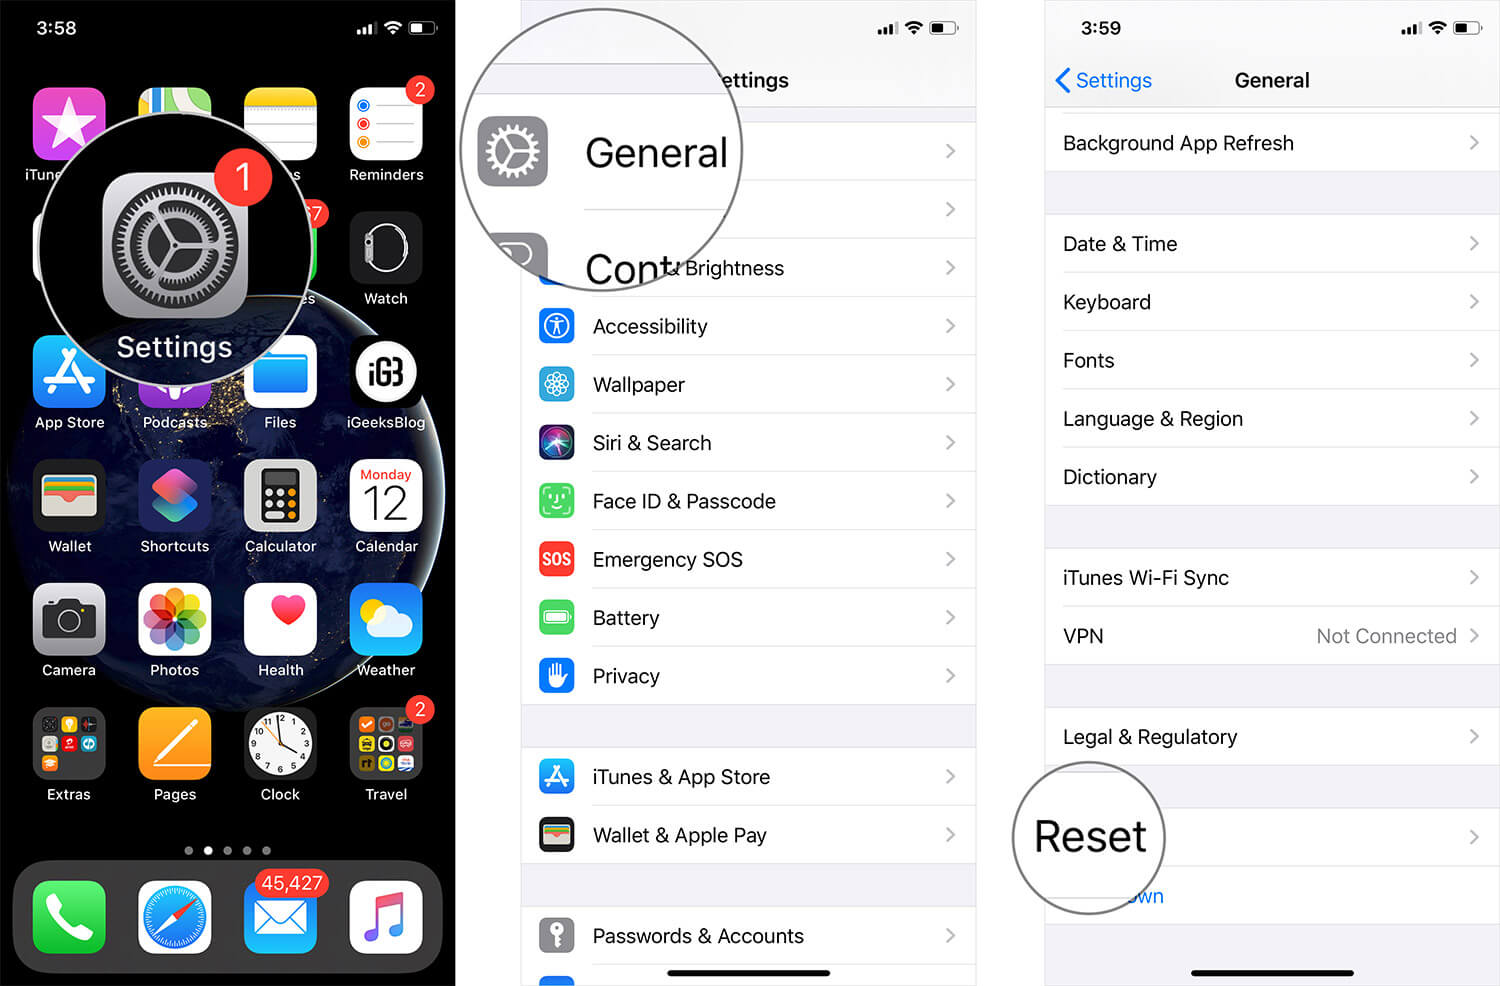 Tap on Settings Then General then Reset on iPhone or iPad